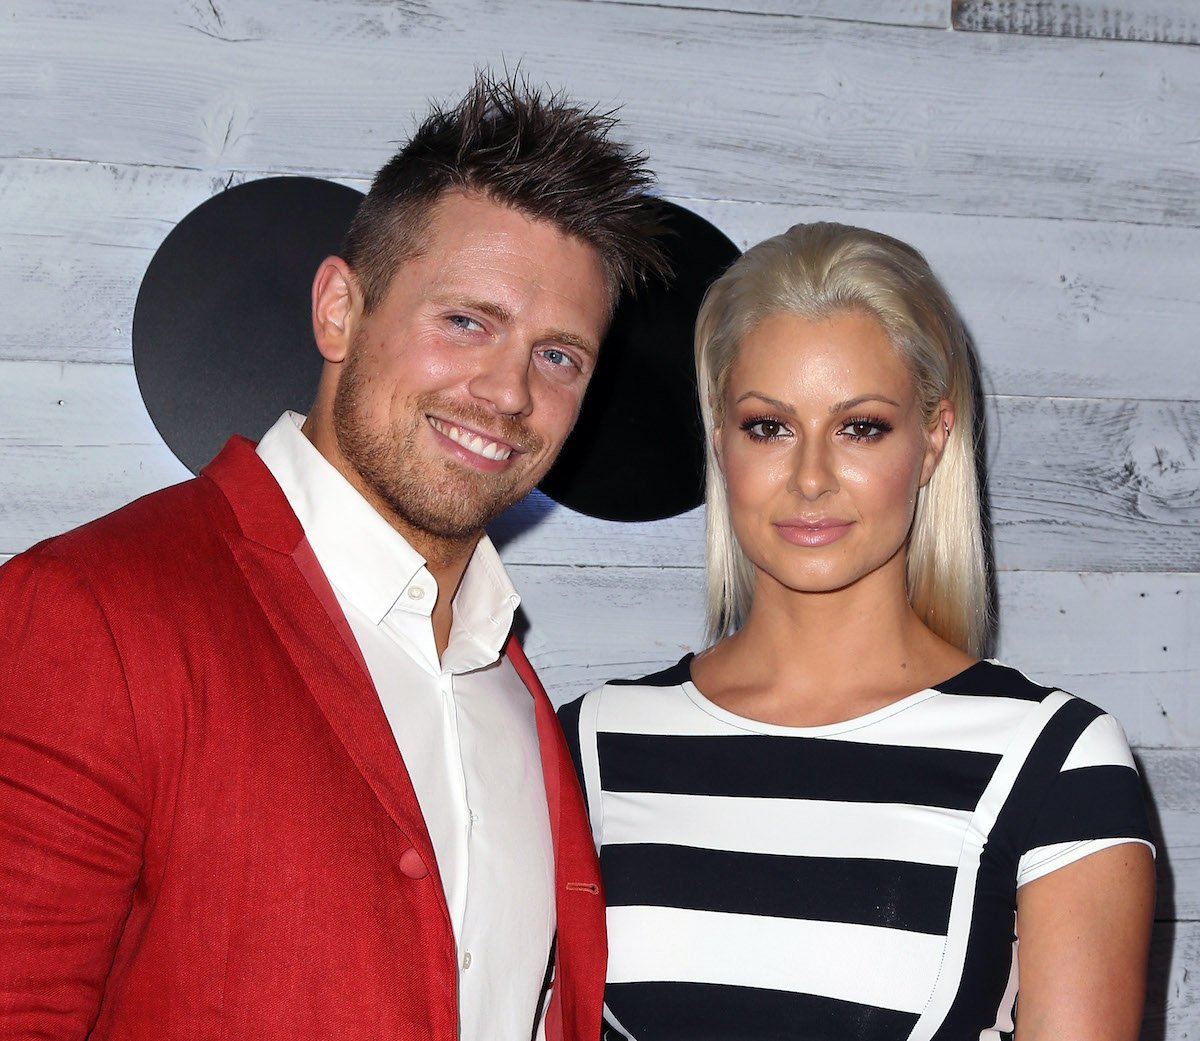 Mike "The Miz" and wife Maryse Mizanin from USA's Miz & Mrs at an event in 2015